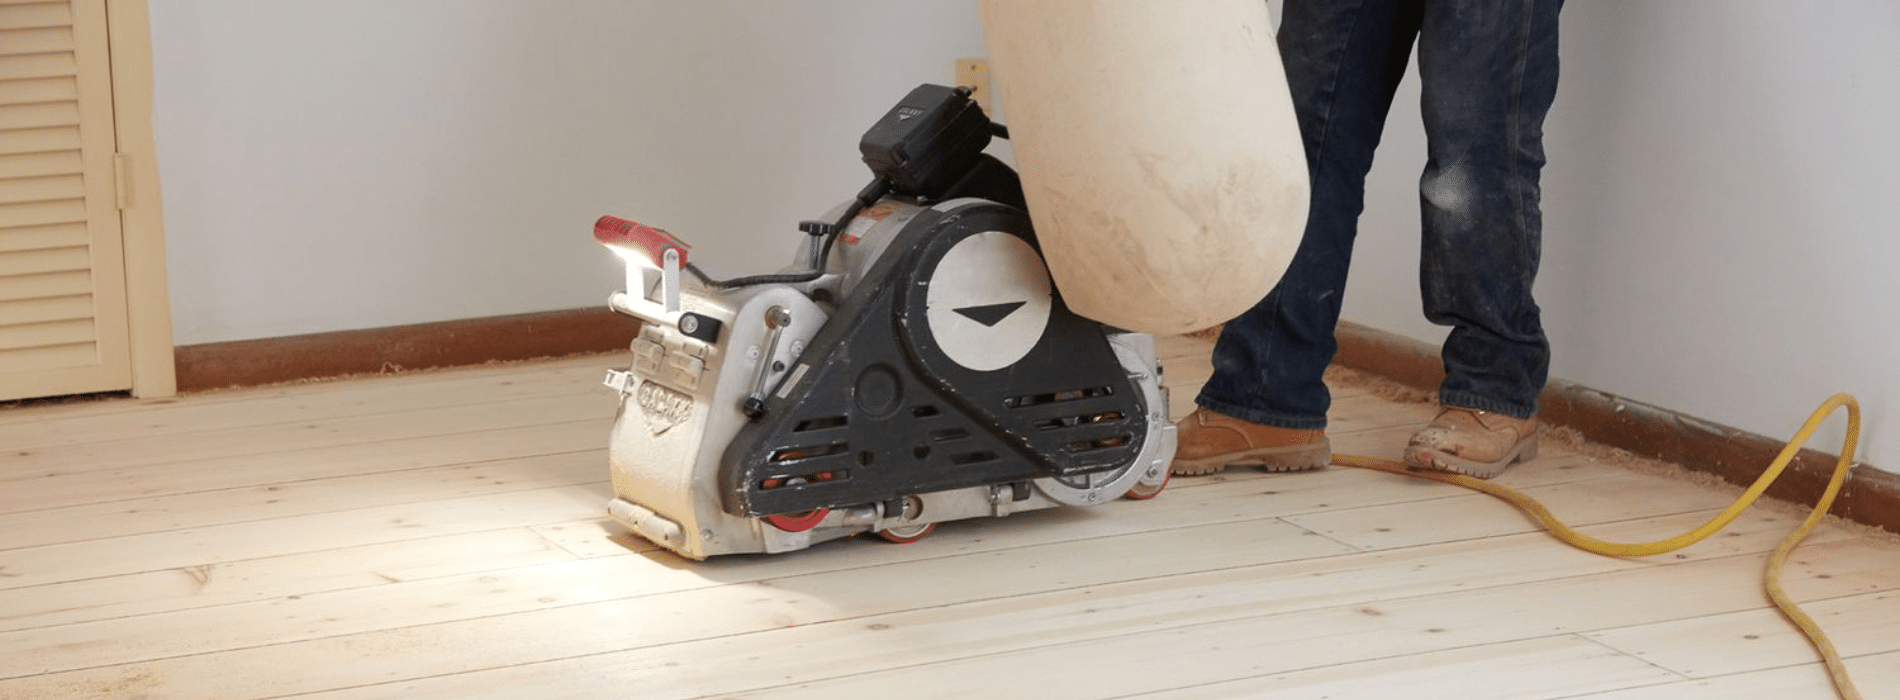 In Battersea, SW11, Mr Sander® skillfully sanding a herringbone floor using the powerful 2.2 kW Bona belt sander. The 220V, 60Hz machine, sized 250x750 mm, creates stunning results while the HEPA-filtered dust extraction system ensures cleanliness and efficiency.